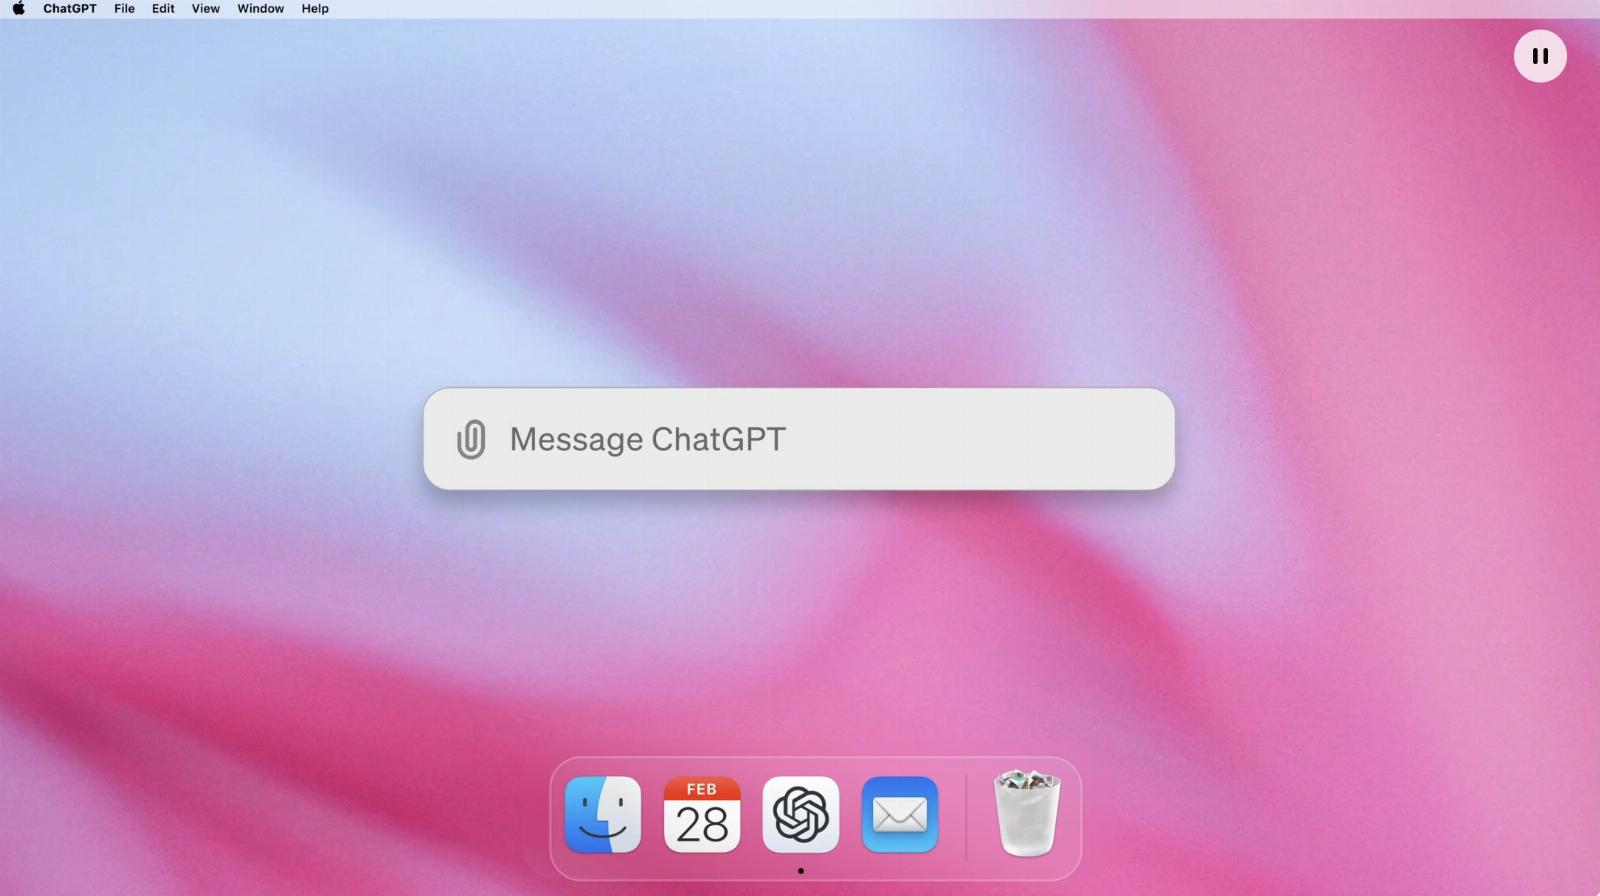 ChatGPT for Mac is now available to all